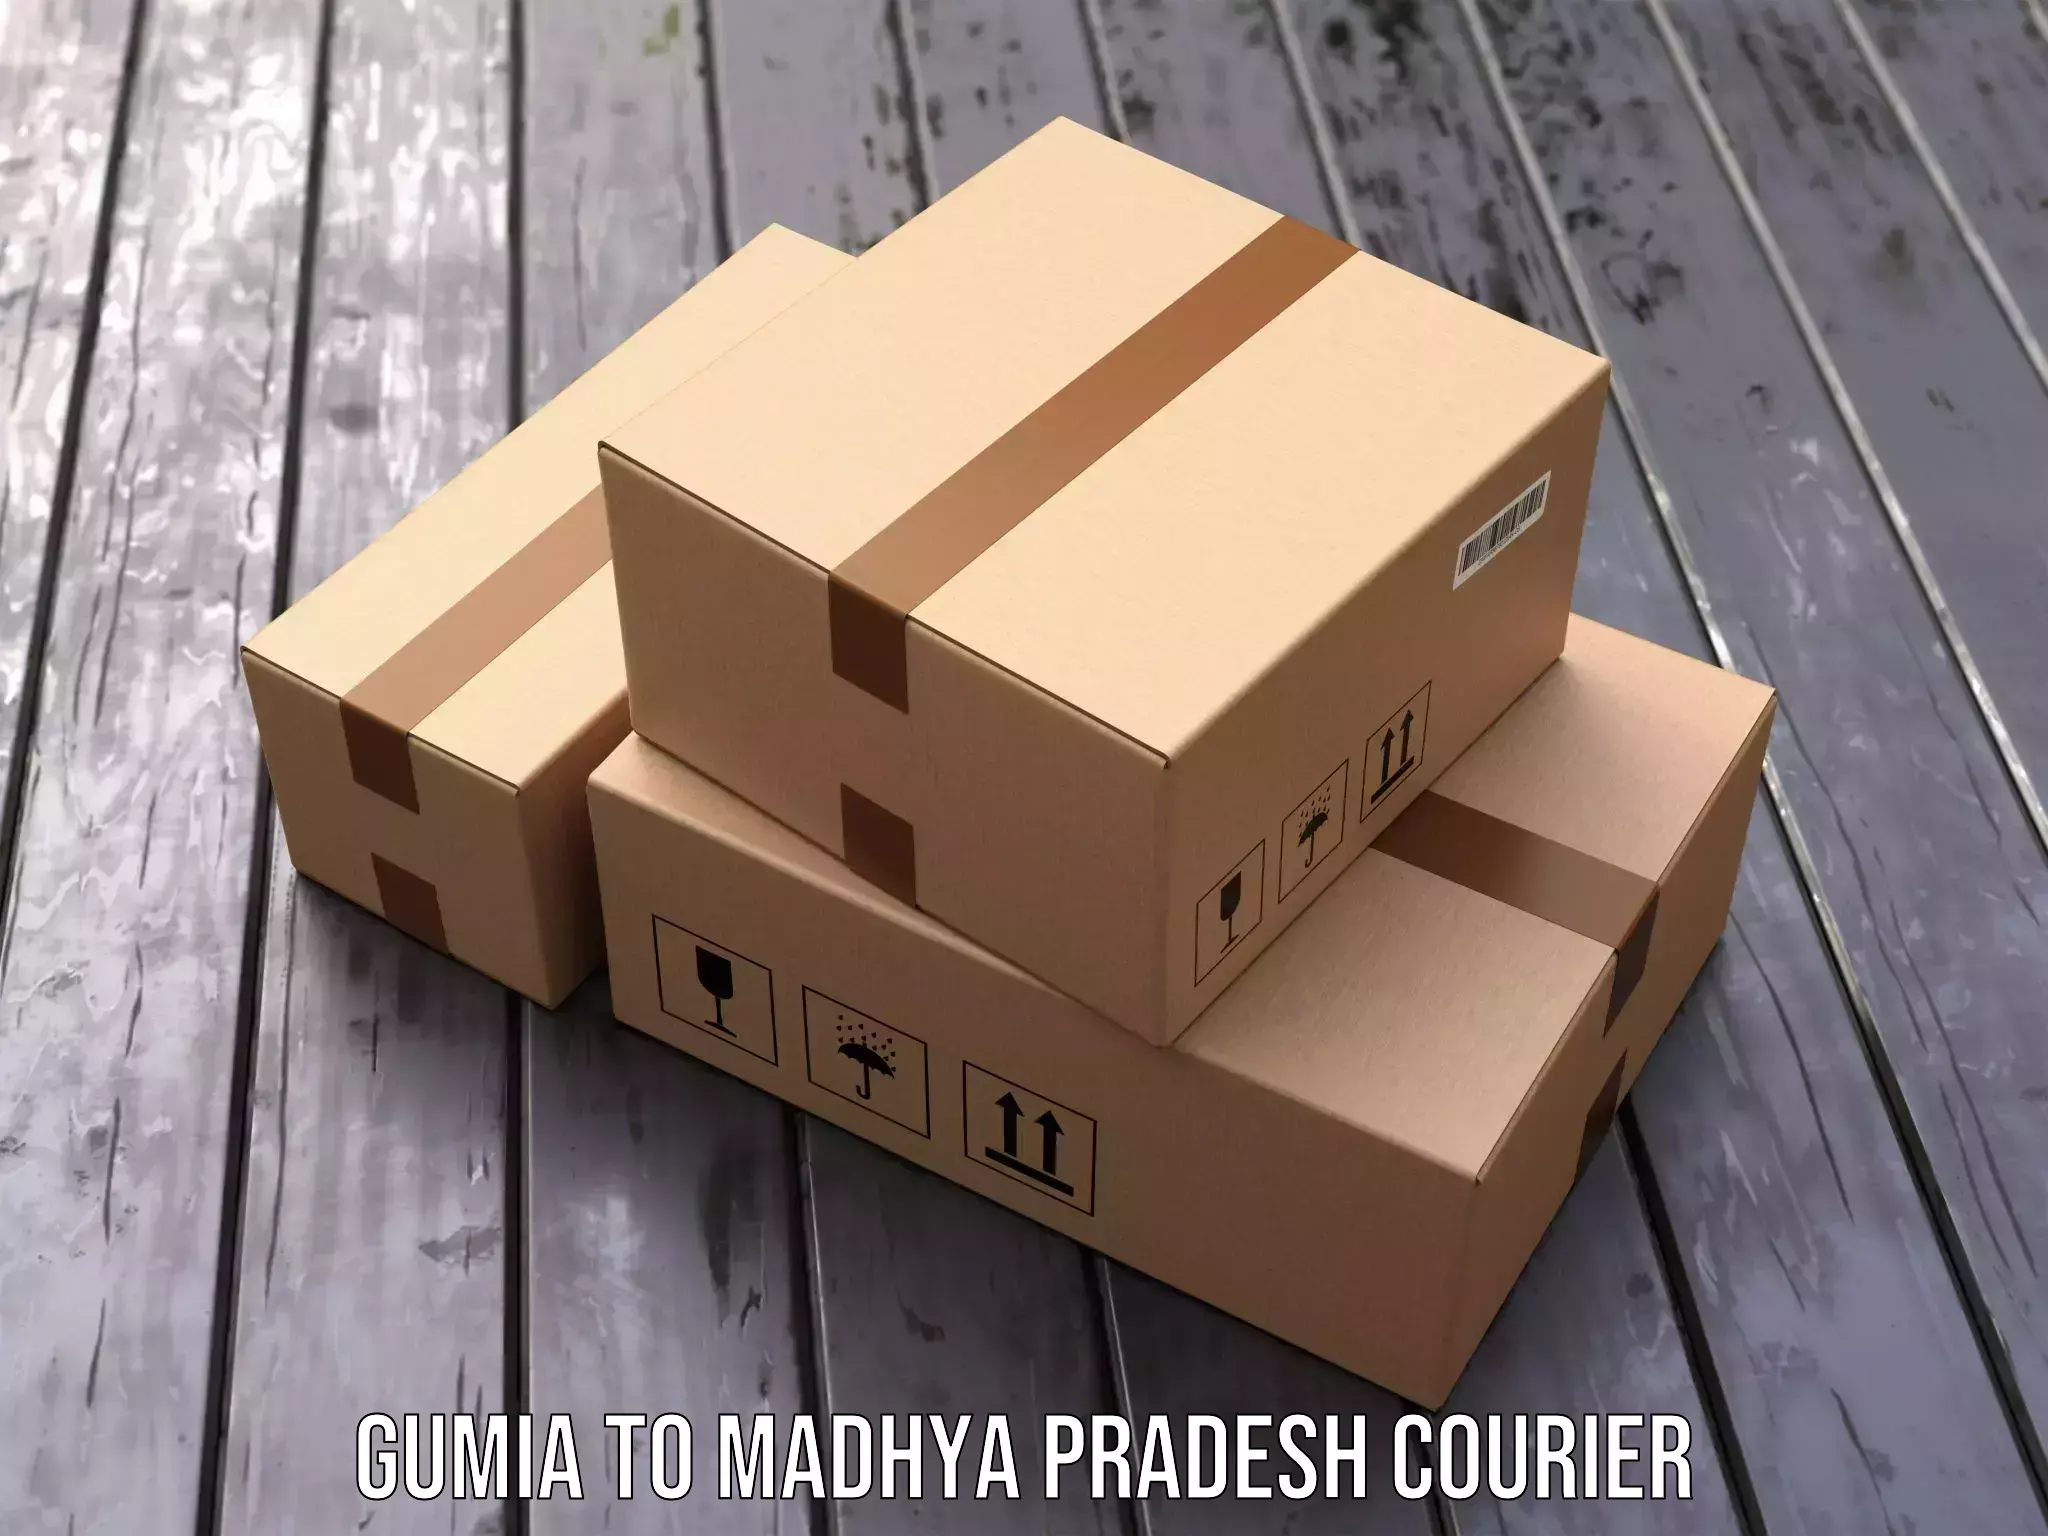 Courier service innovation Gumia to Mundi